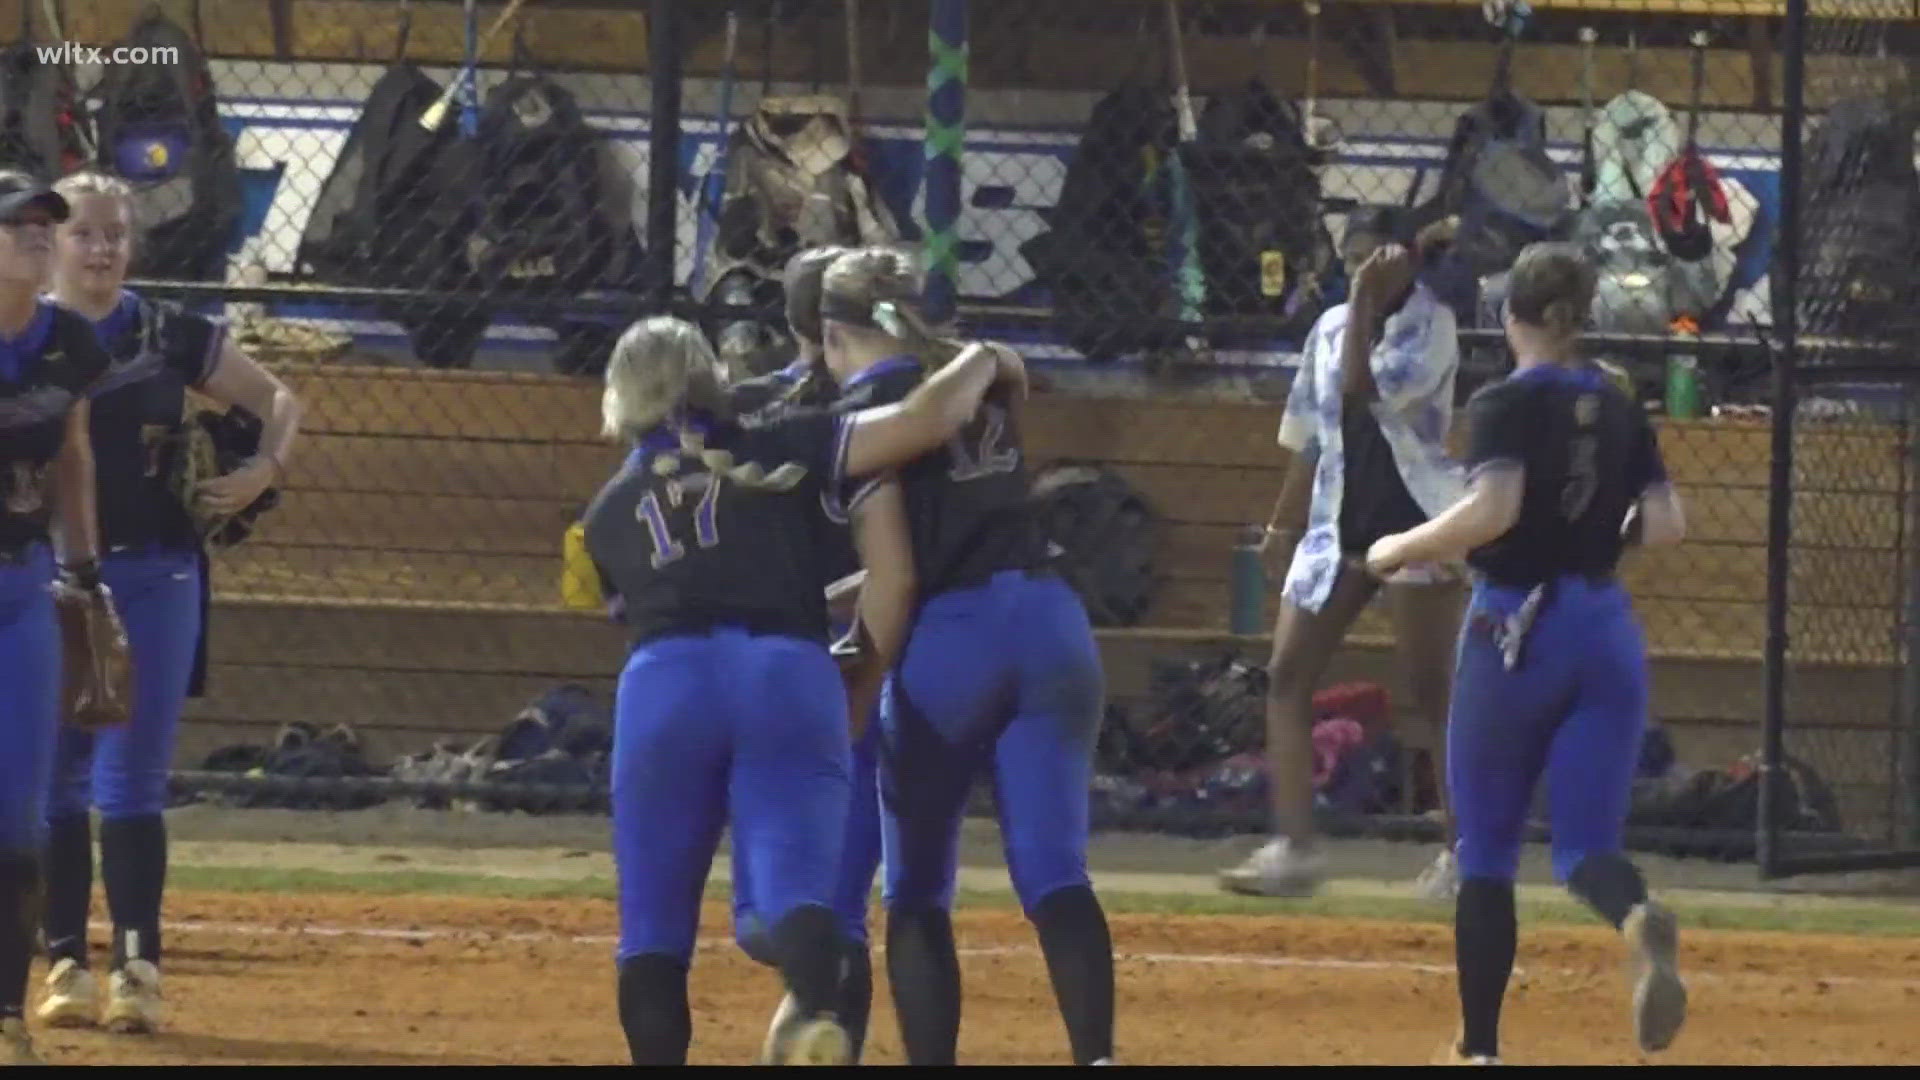 Needing just one win to advance to the state finals, Lexington defeated Byrnes 10-6 in the second game of a doubleheader